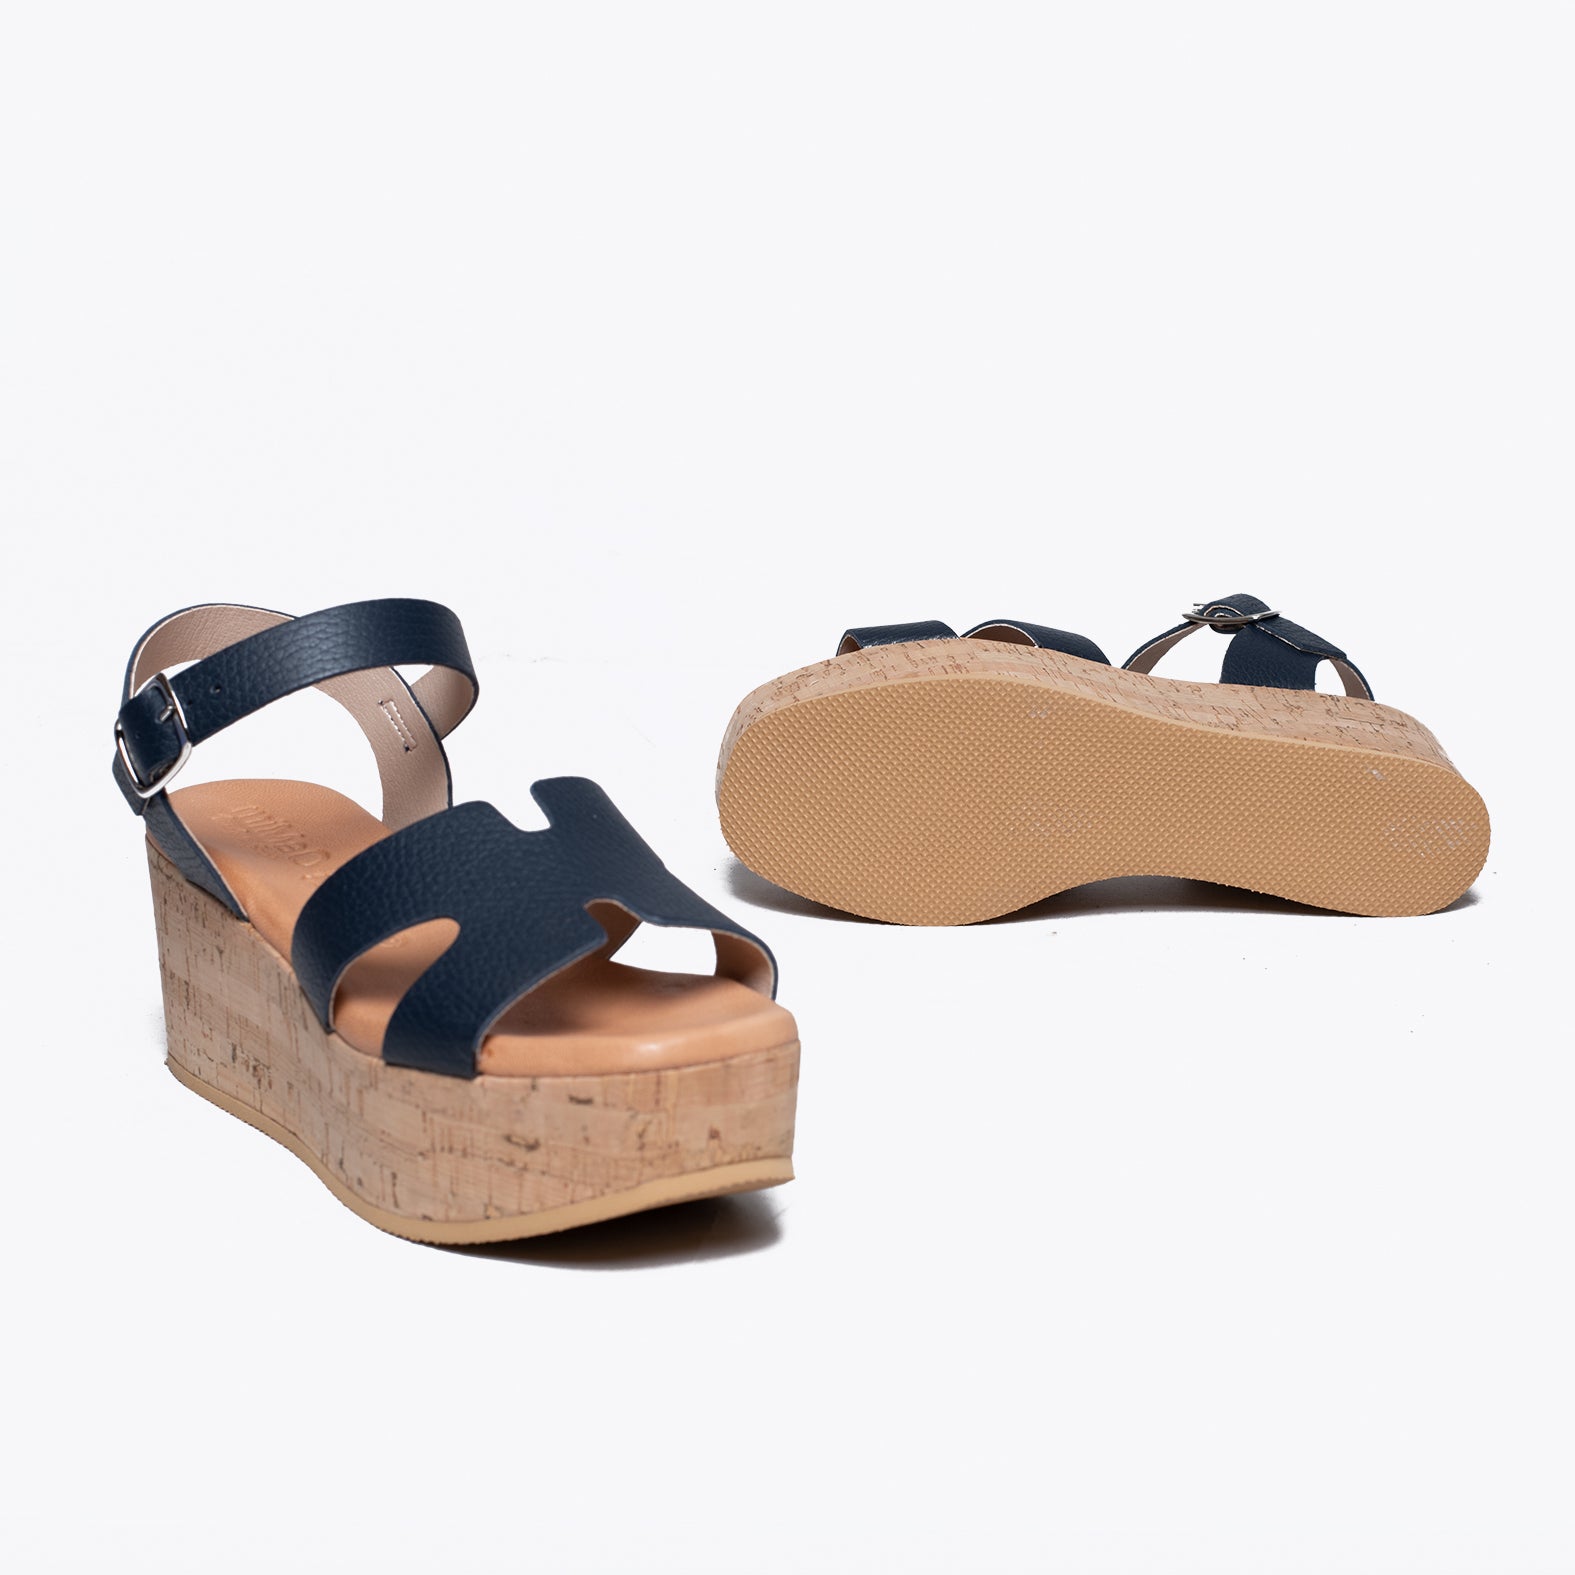 HACHE – NAVY SANDAL WITH CORK WEDGE